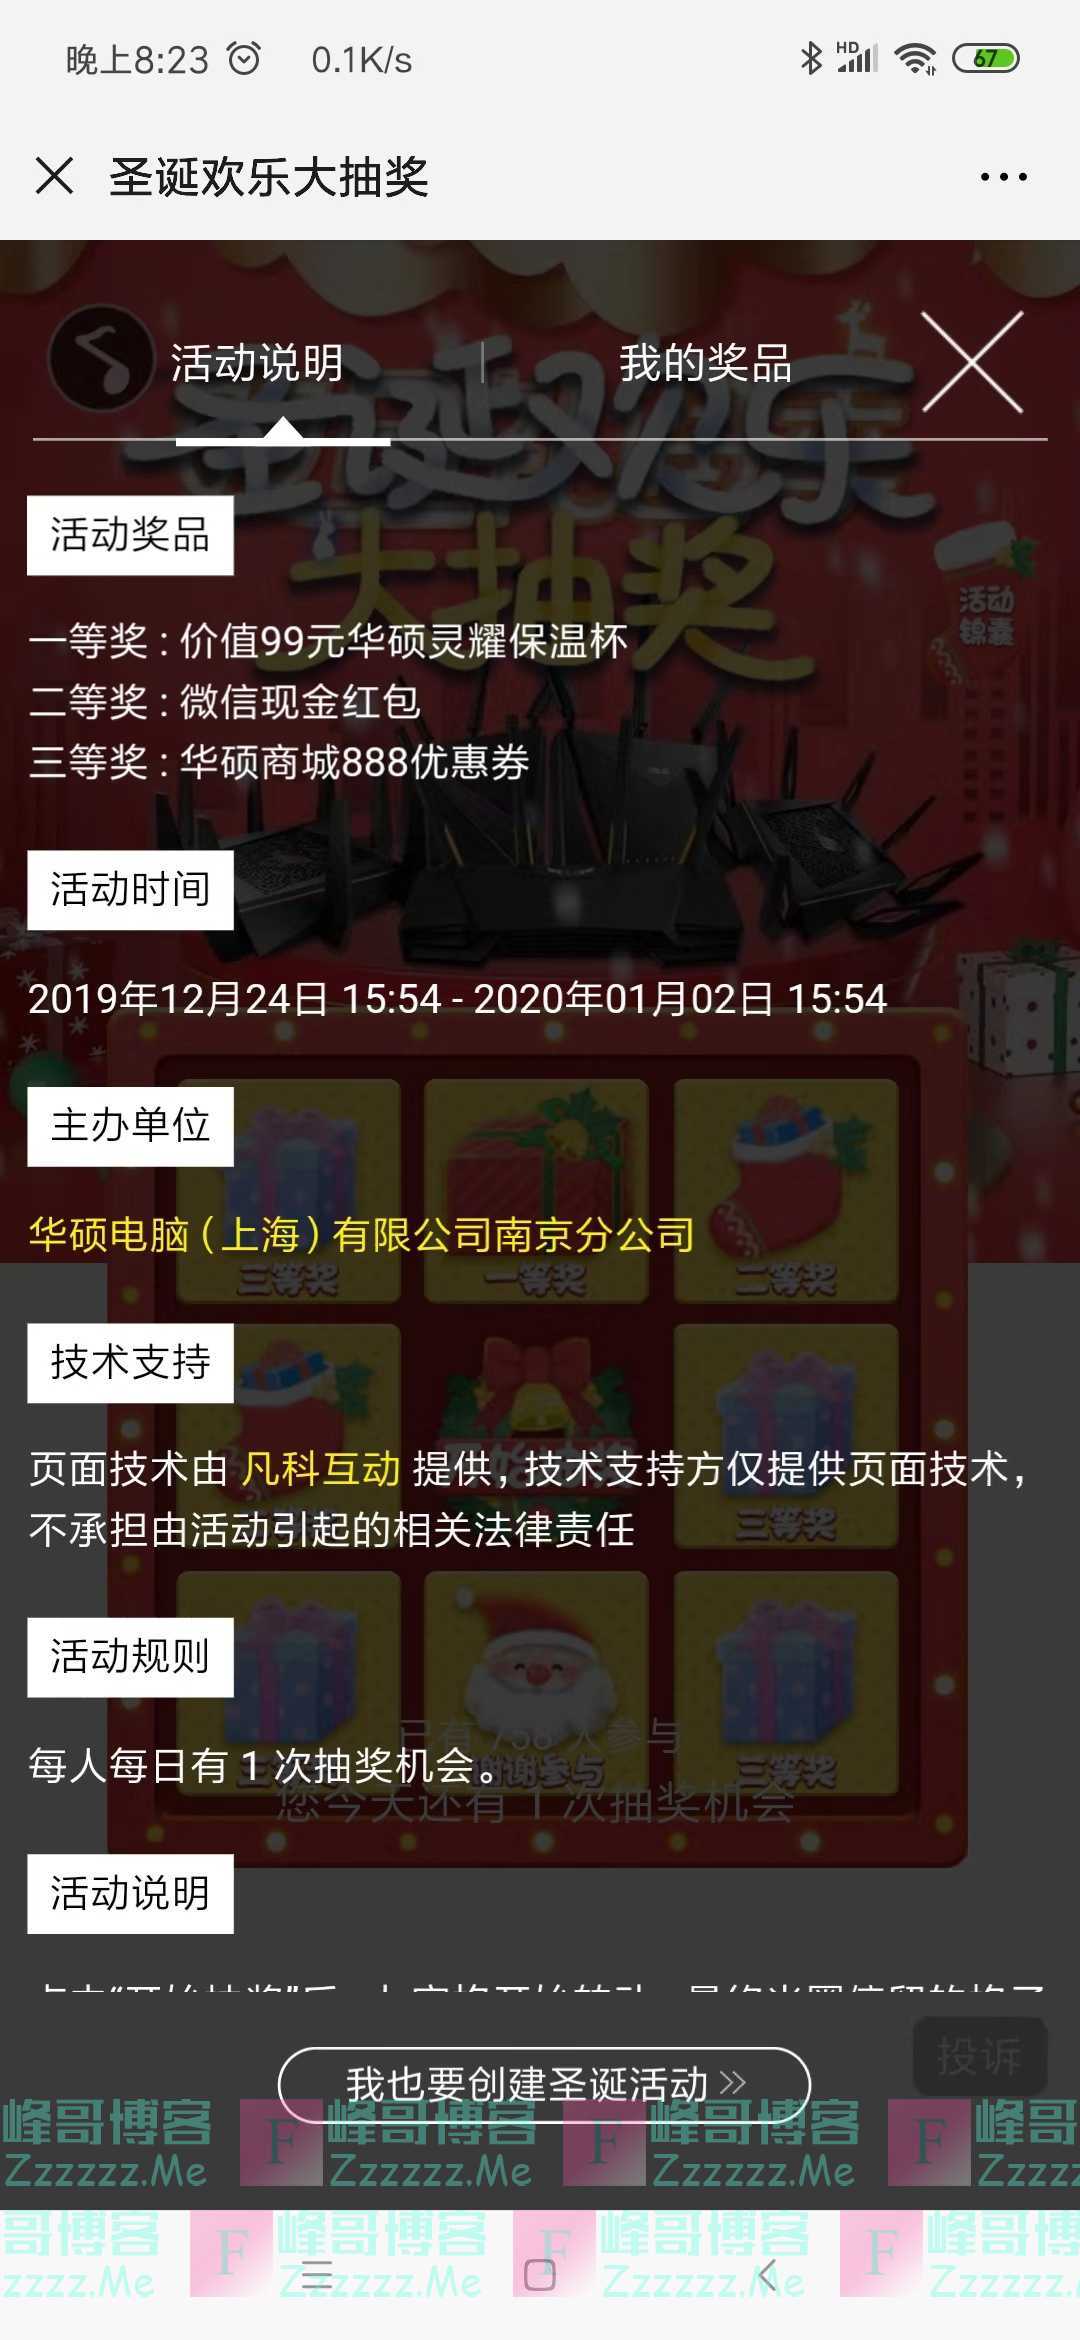 ASUS华硕苏皖圣诞欢乐大抽奖（截止1月2日）